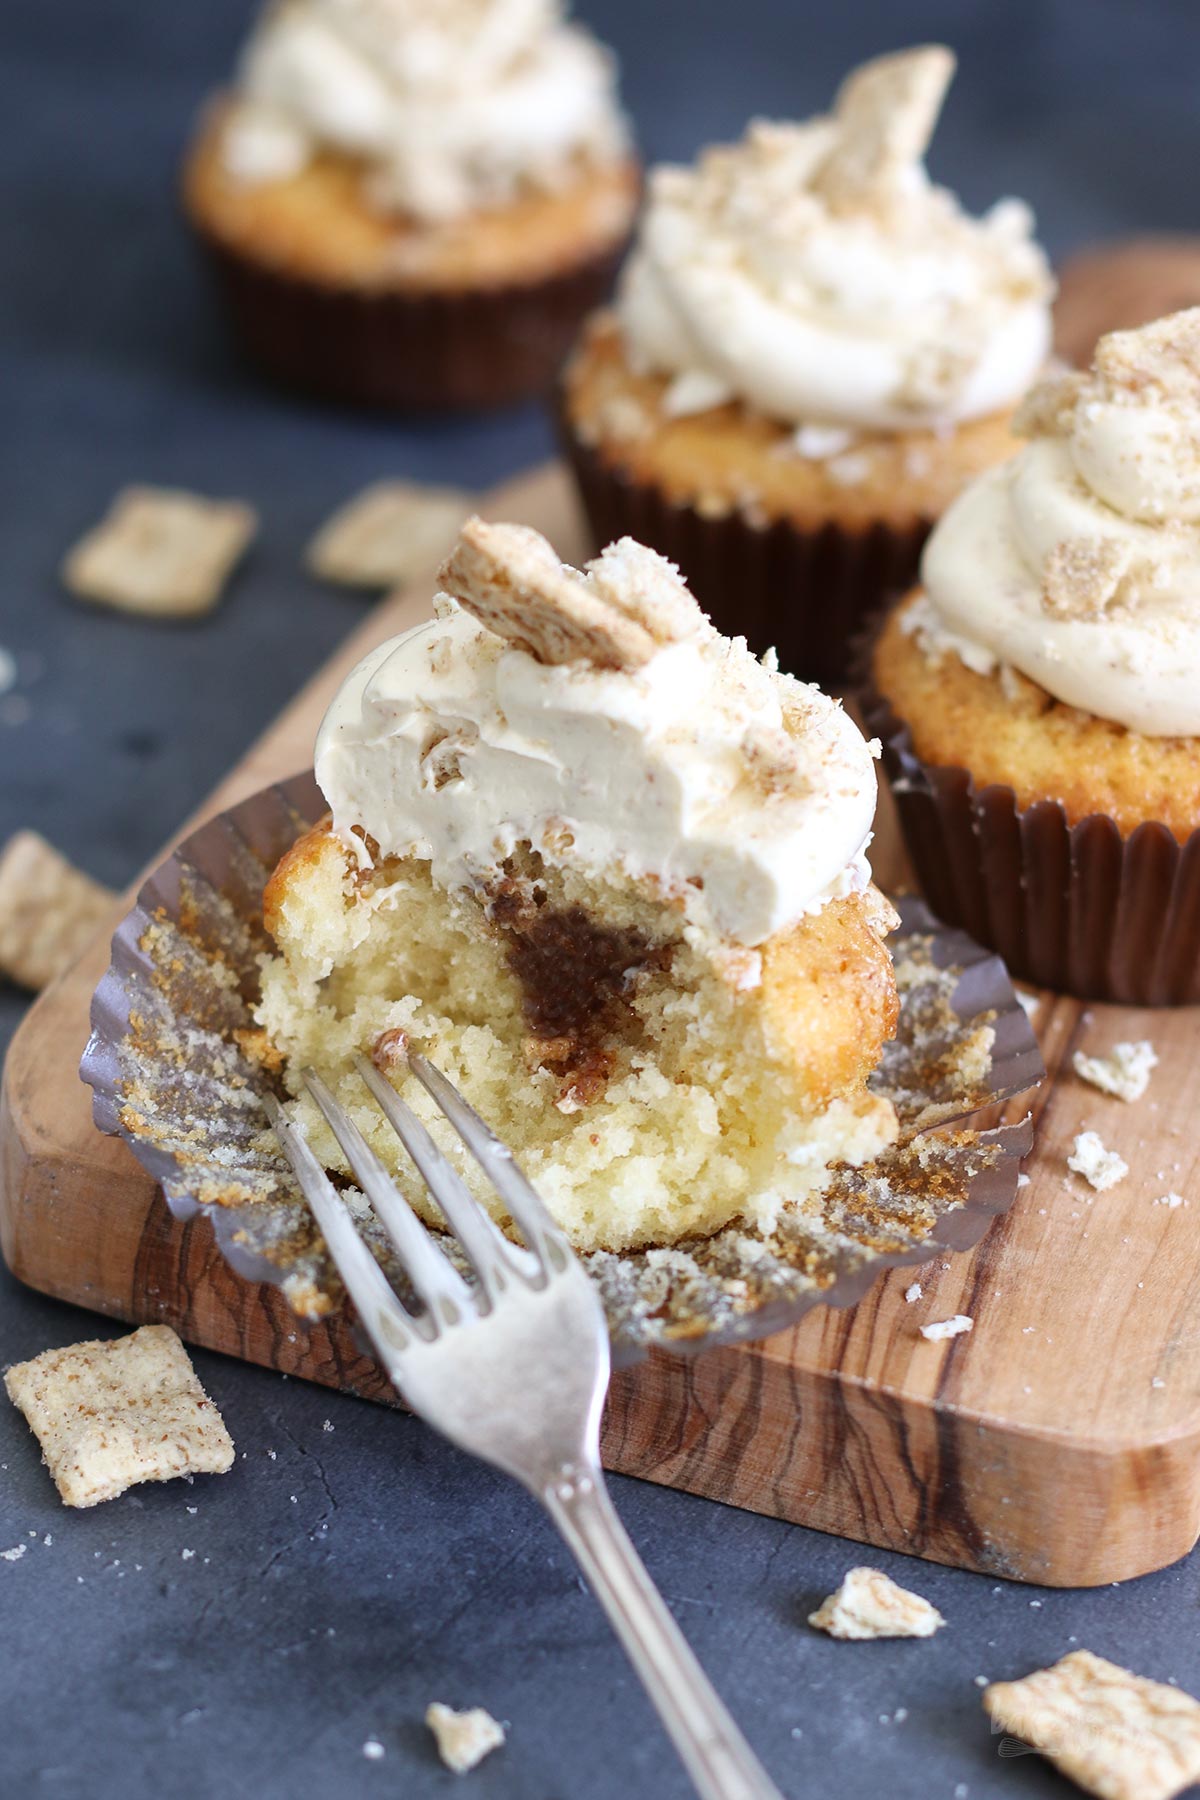 Cinnamon Crunch Cupcakes | Bake to the roots